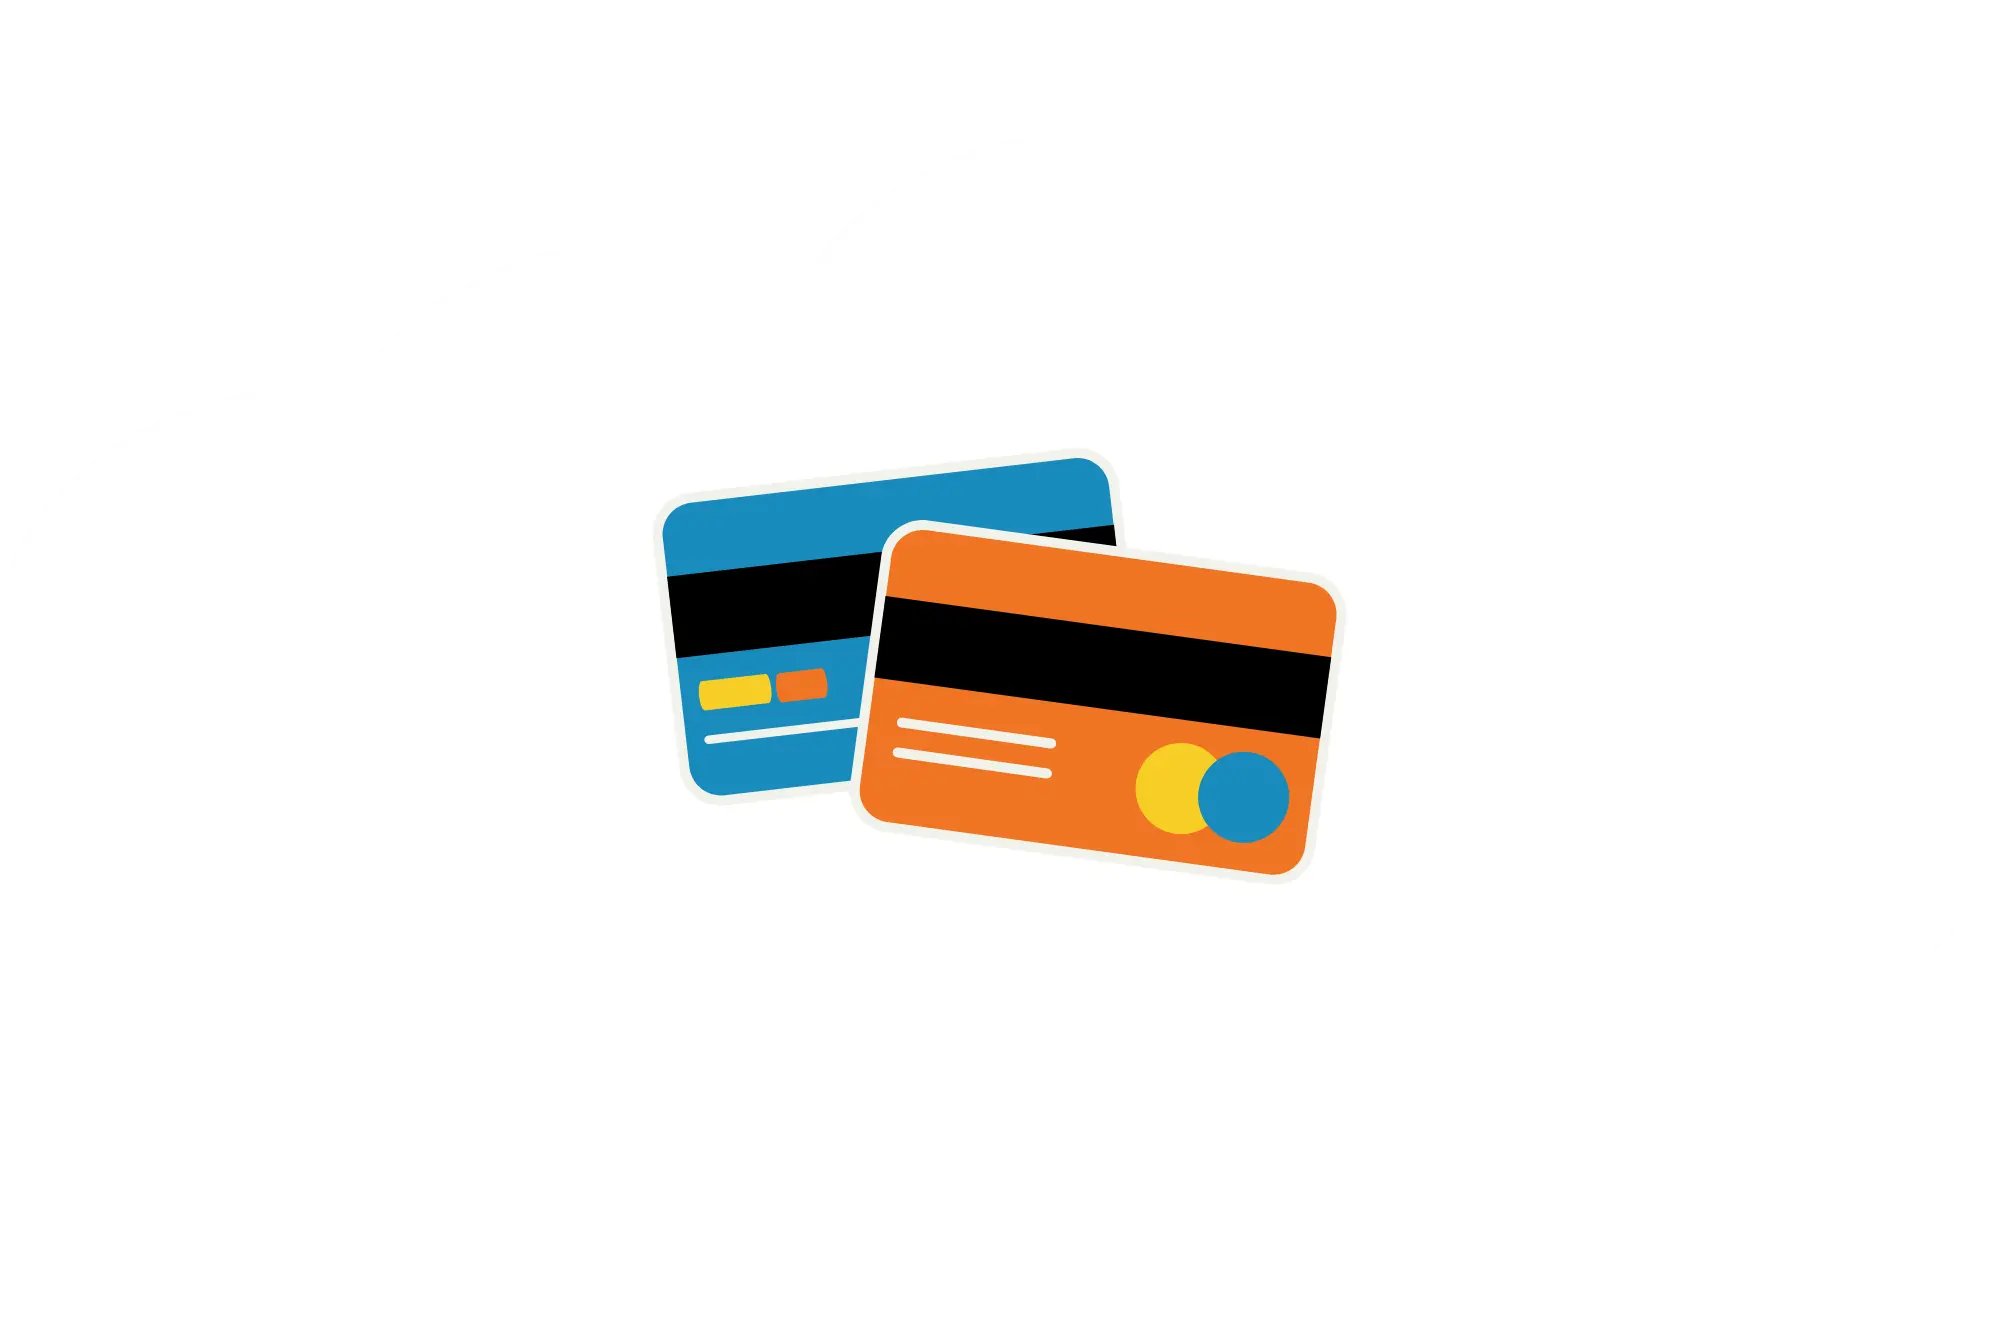 A cloud with credit cards in it to represent transunion vs experian credit score.